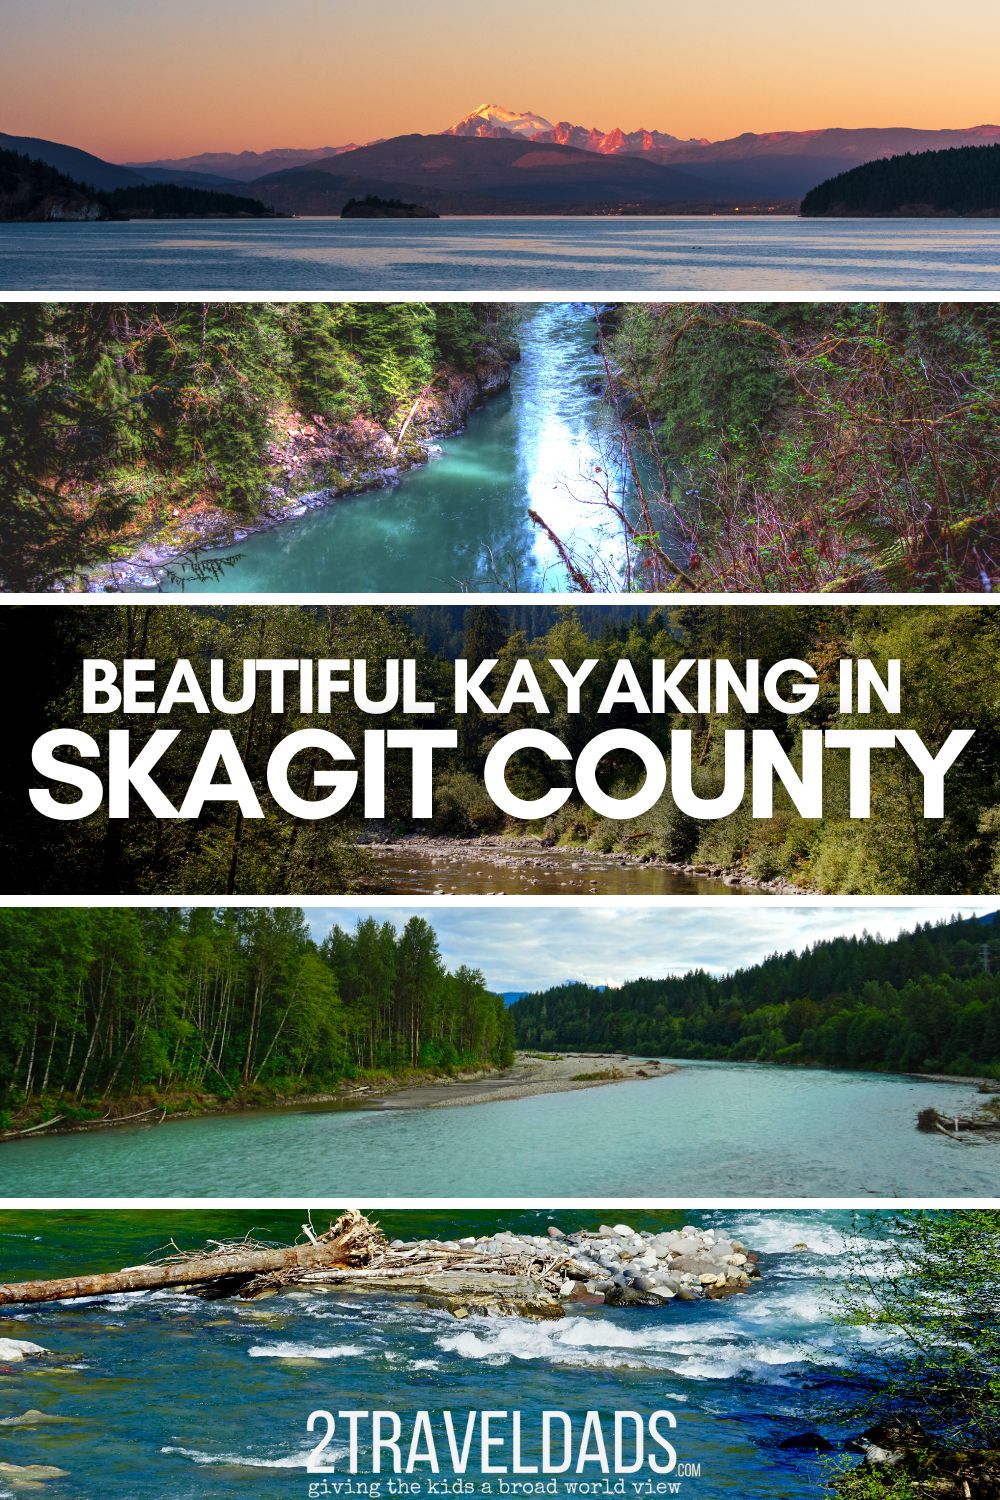 Kayaking in Skagit County ranges from wide rivers with bald eagles lining the shore to tidal flats and bays. See our top picks for kayaking in La Conner and the Northern Puget Sound.